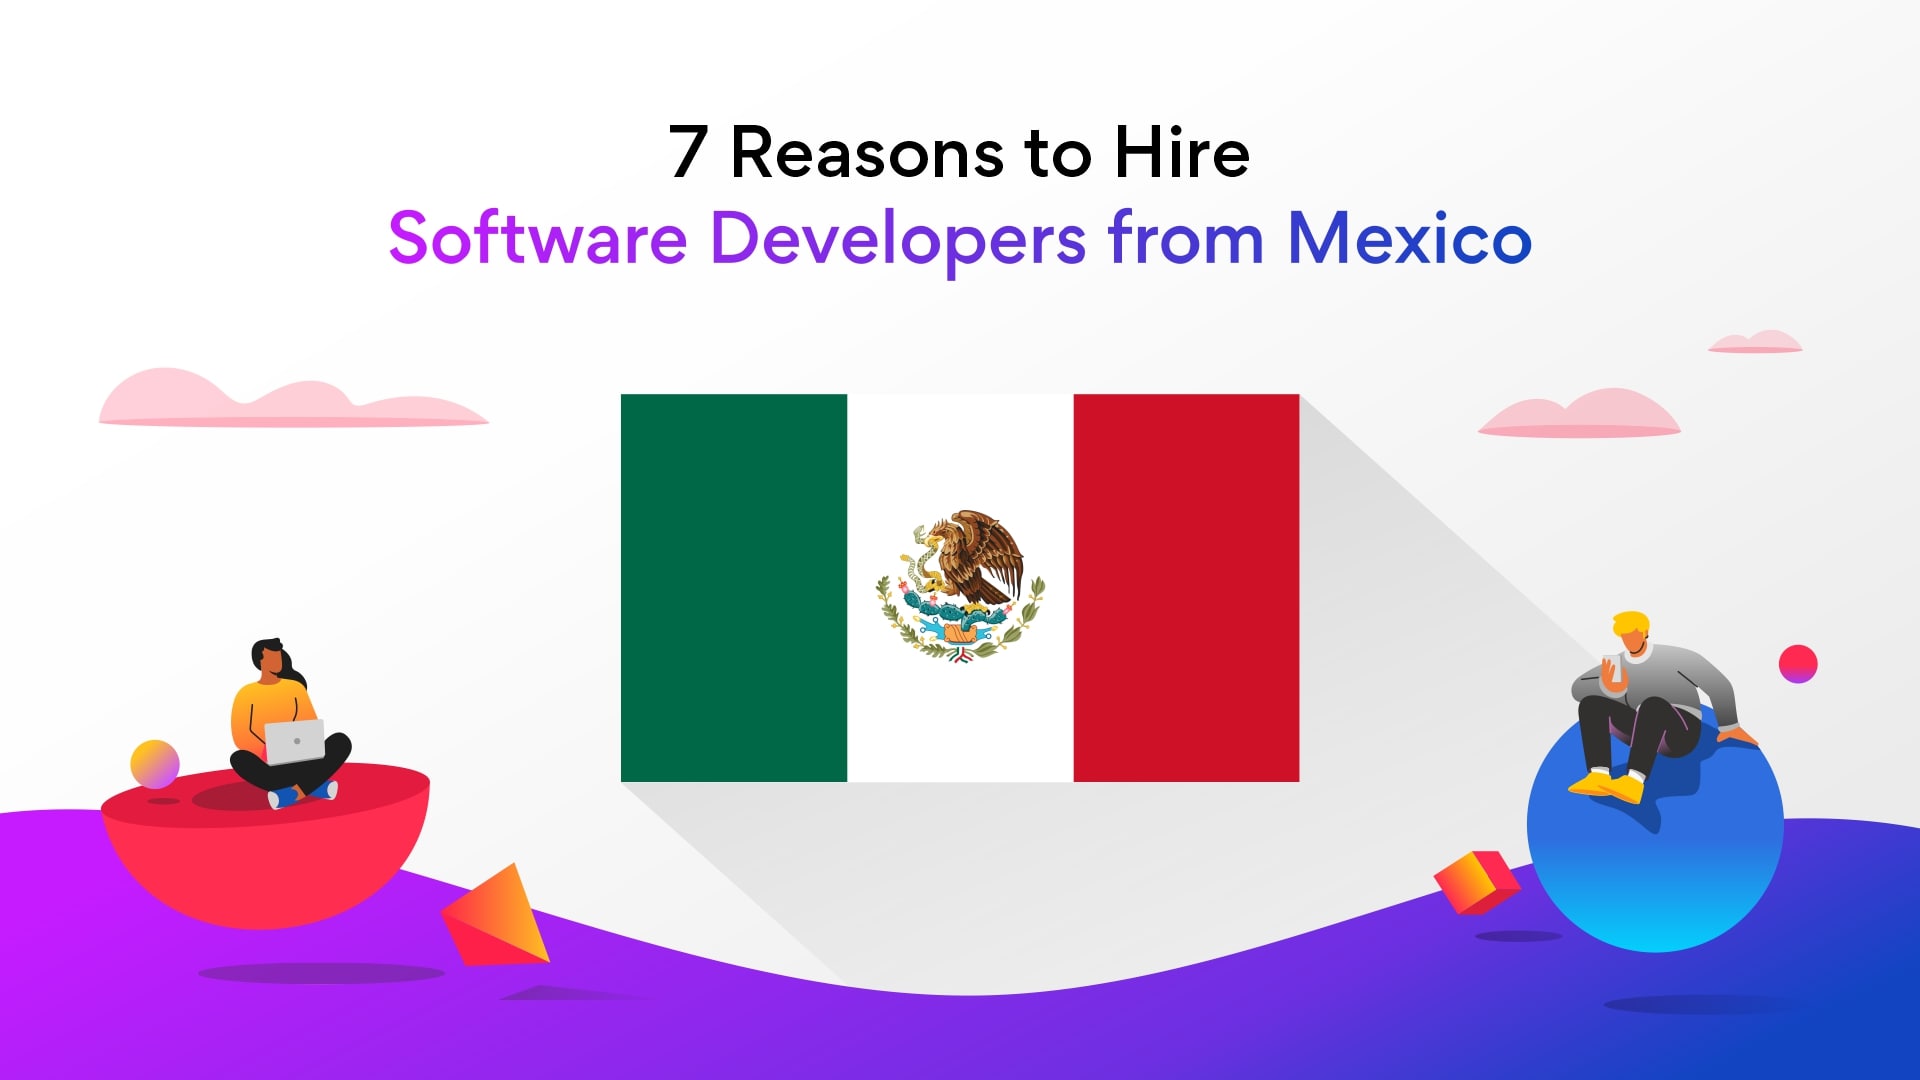 Hire Developers in Mexico: 7 Key Benefits